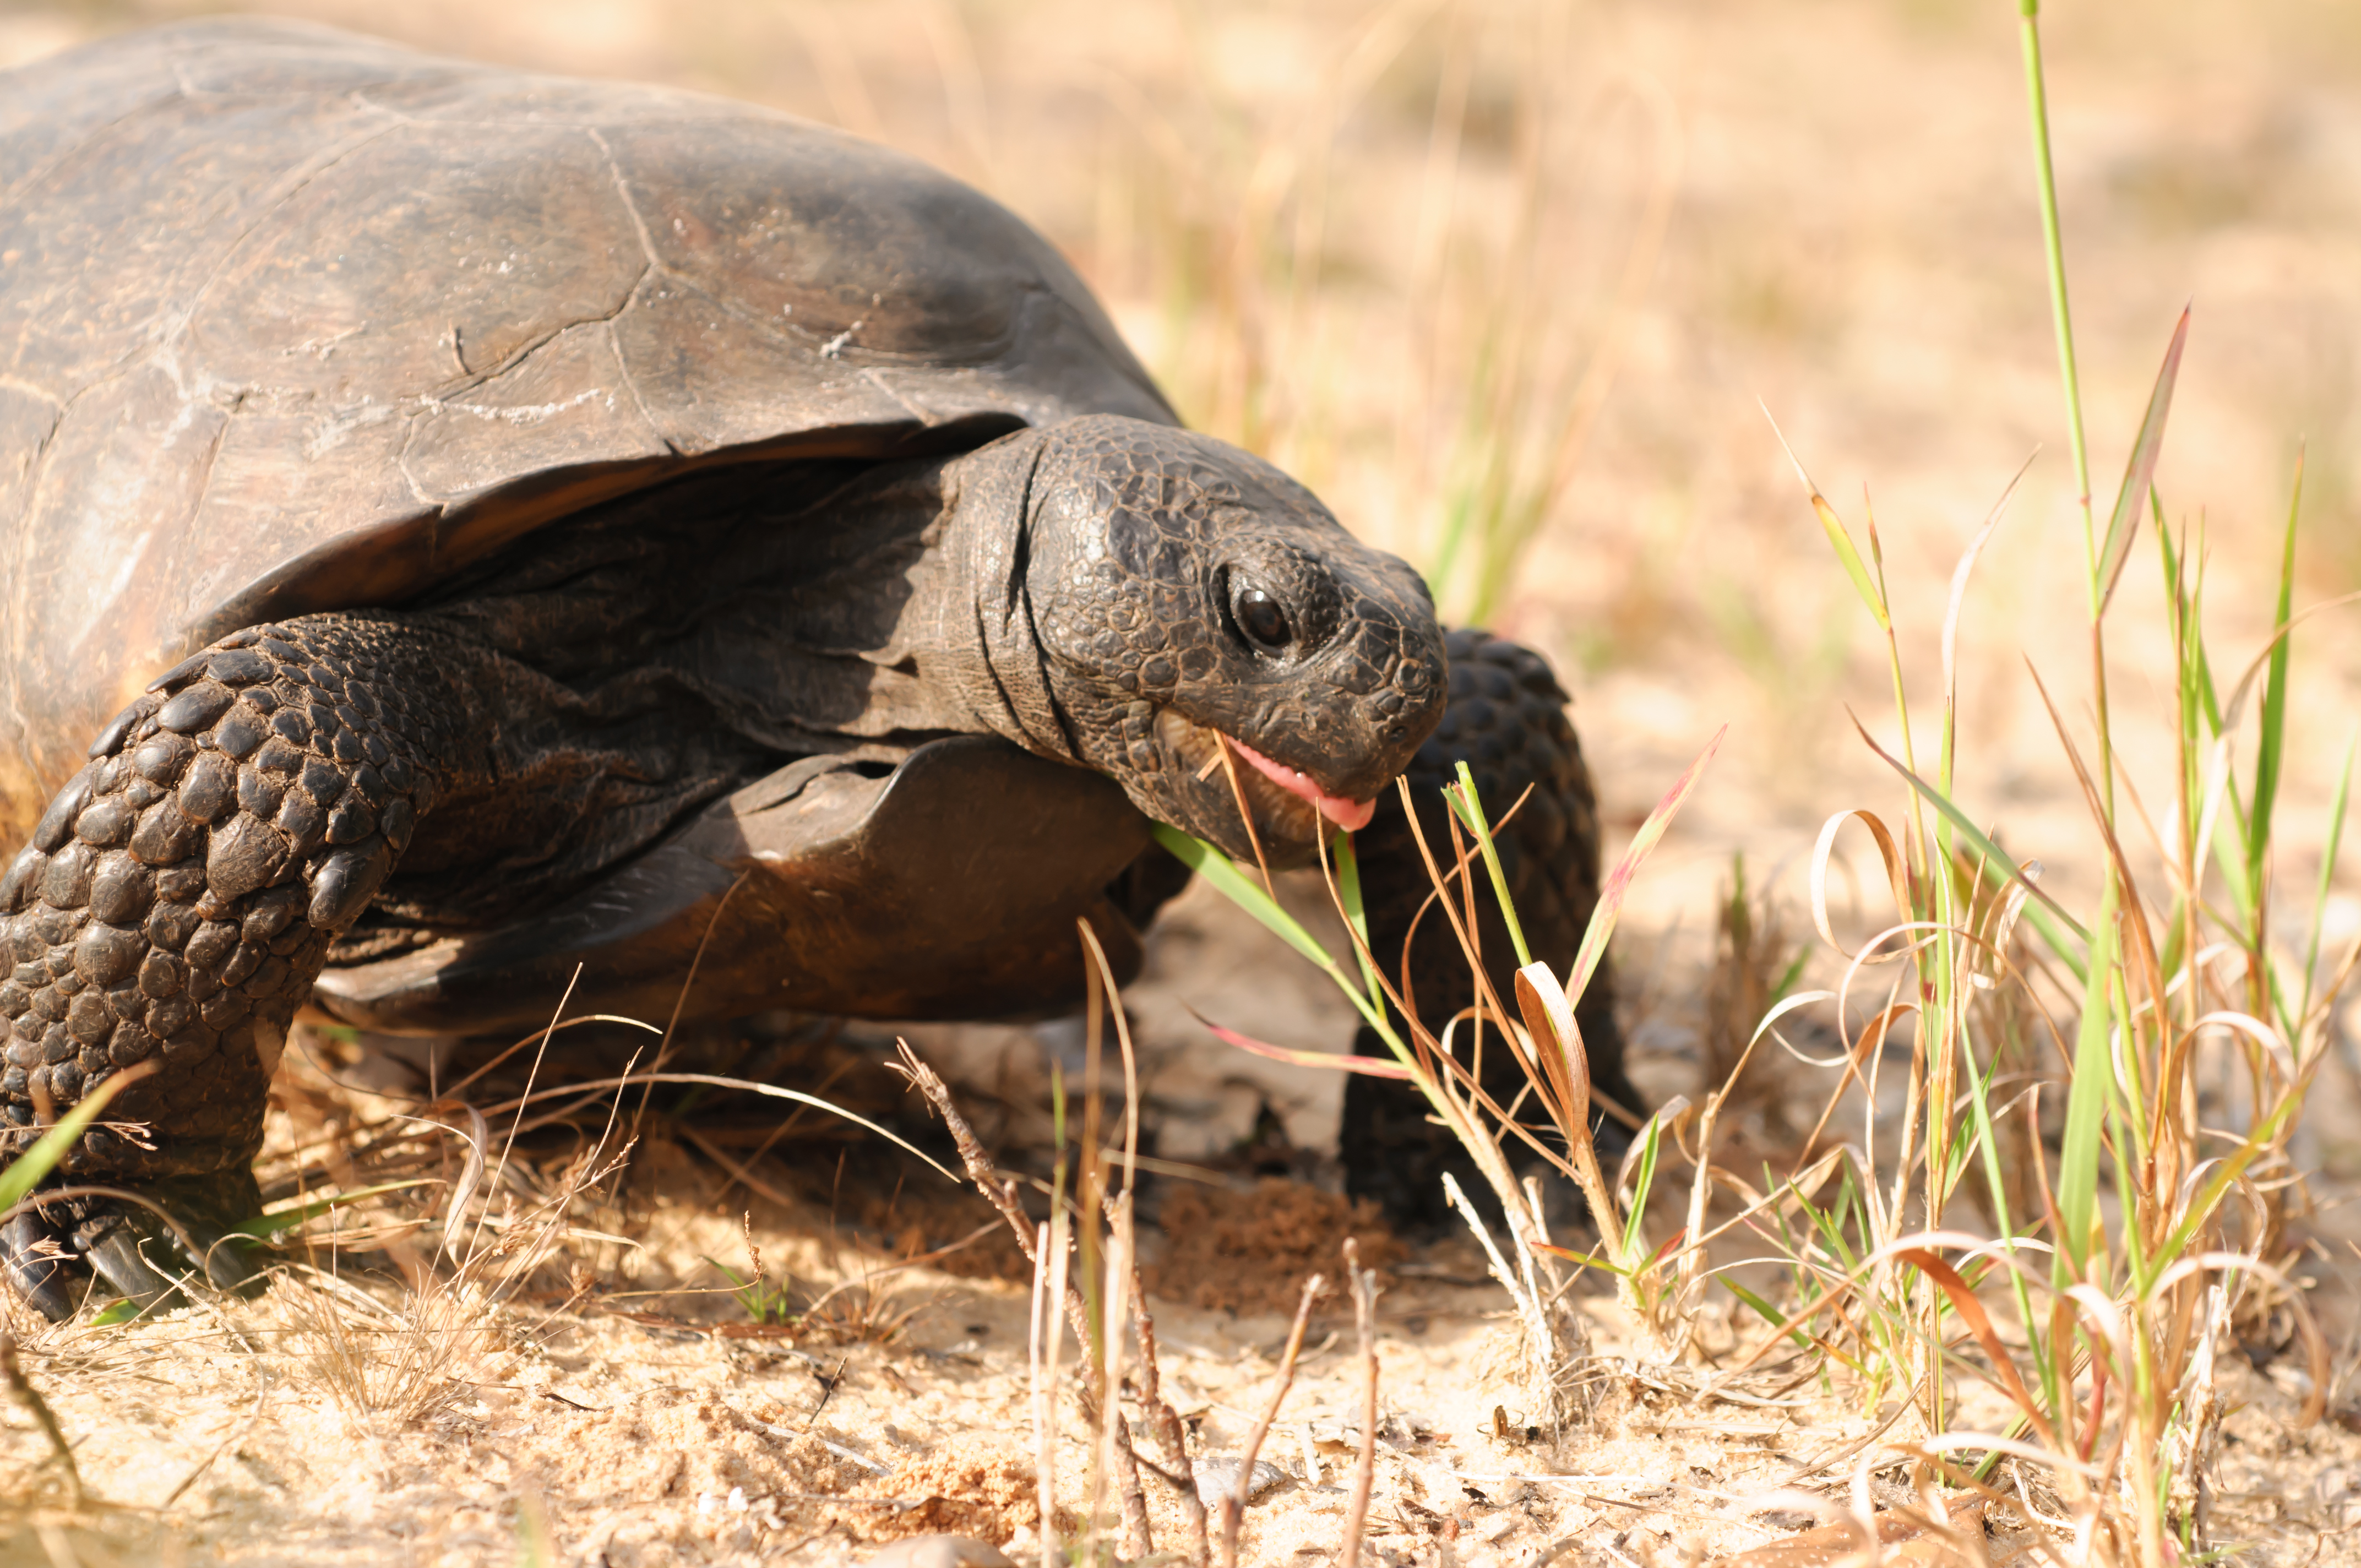 Gopher tortoise has tongue partially out as it takes a bite of grass. 